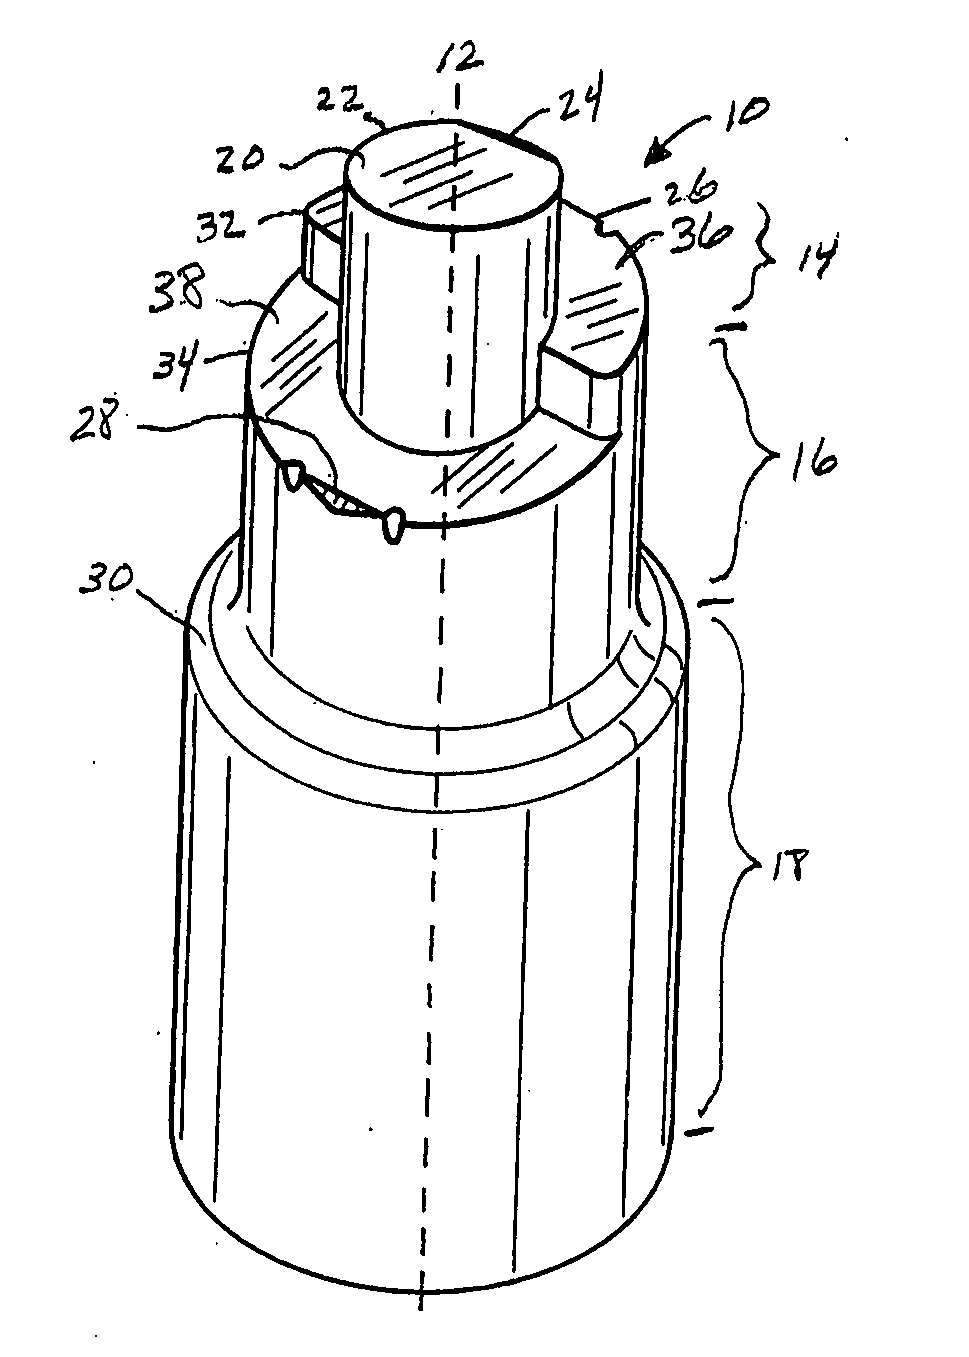 Punch, apparatus and method for forming opposing holes in a hollow part, and a part formed therefrom